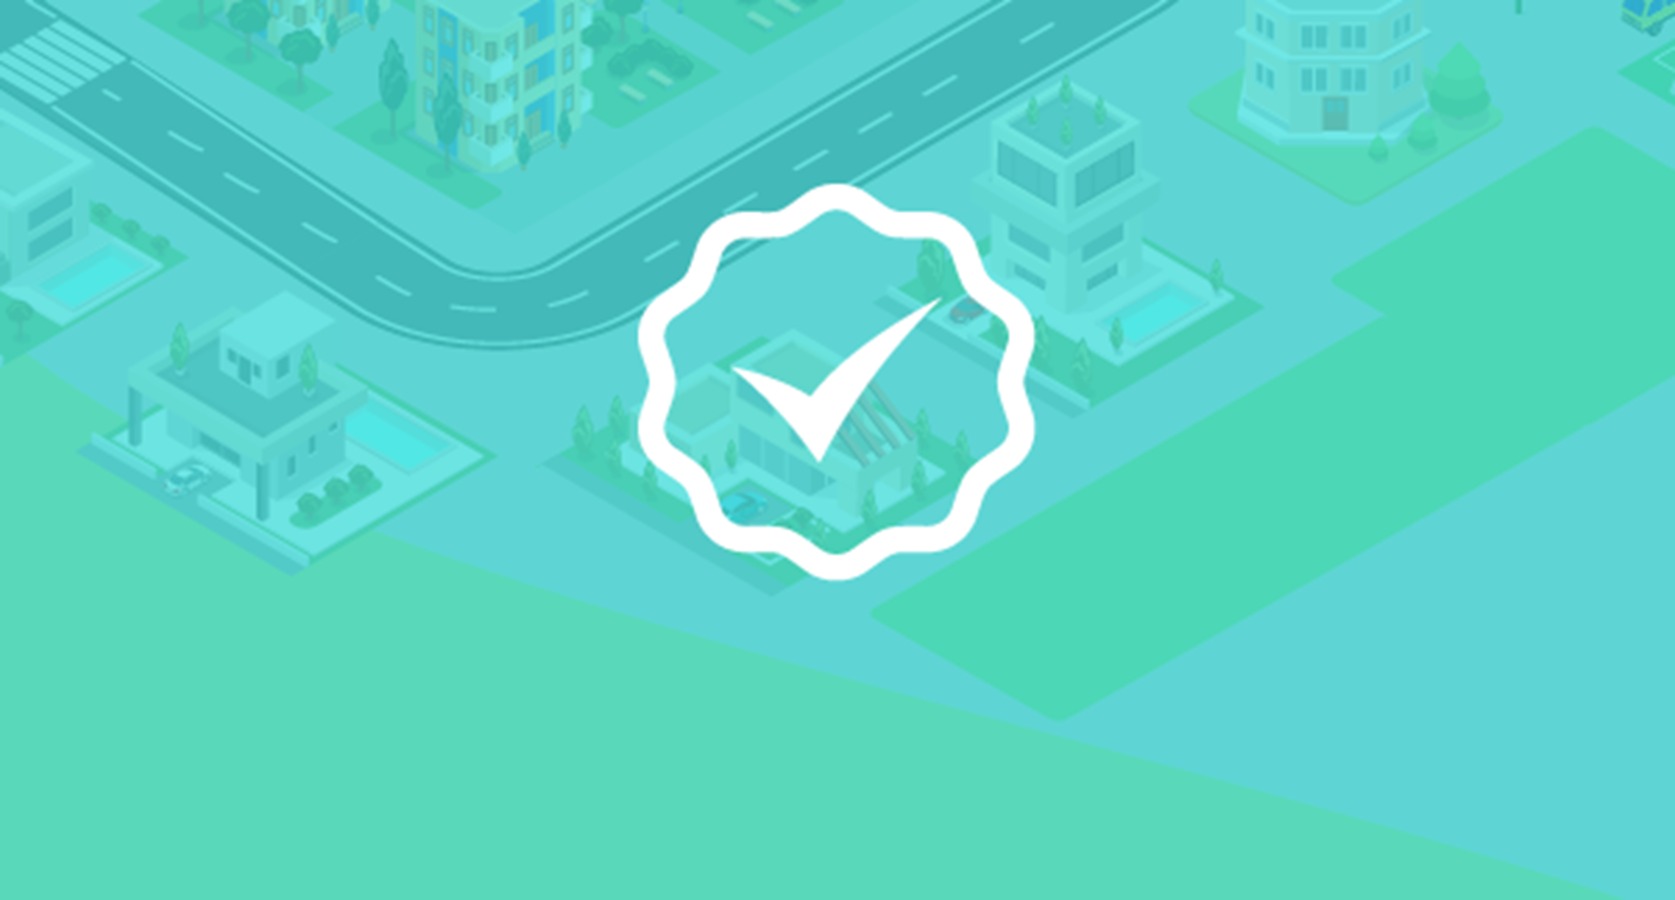 Circle and check mark icon with map background and teal overlay representing Respected Accreditation